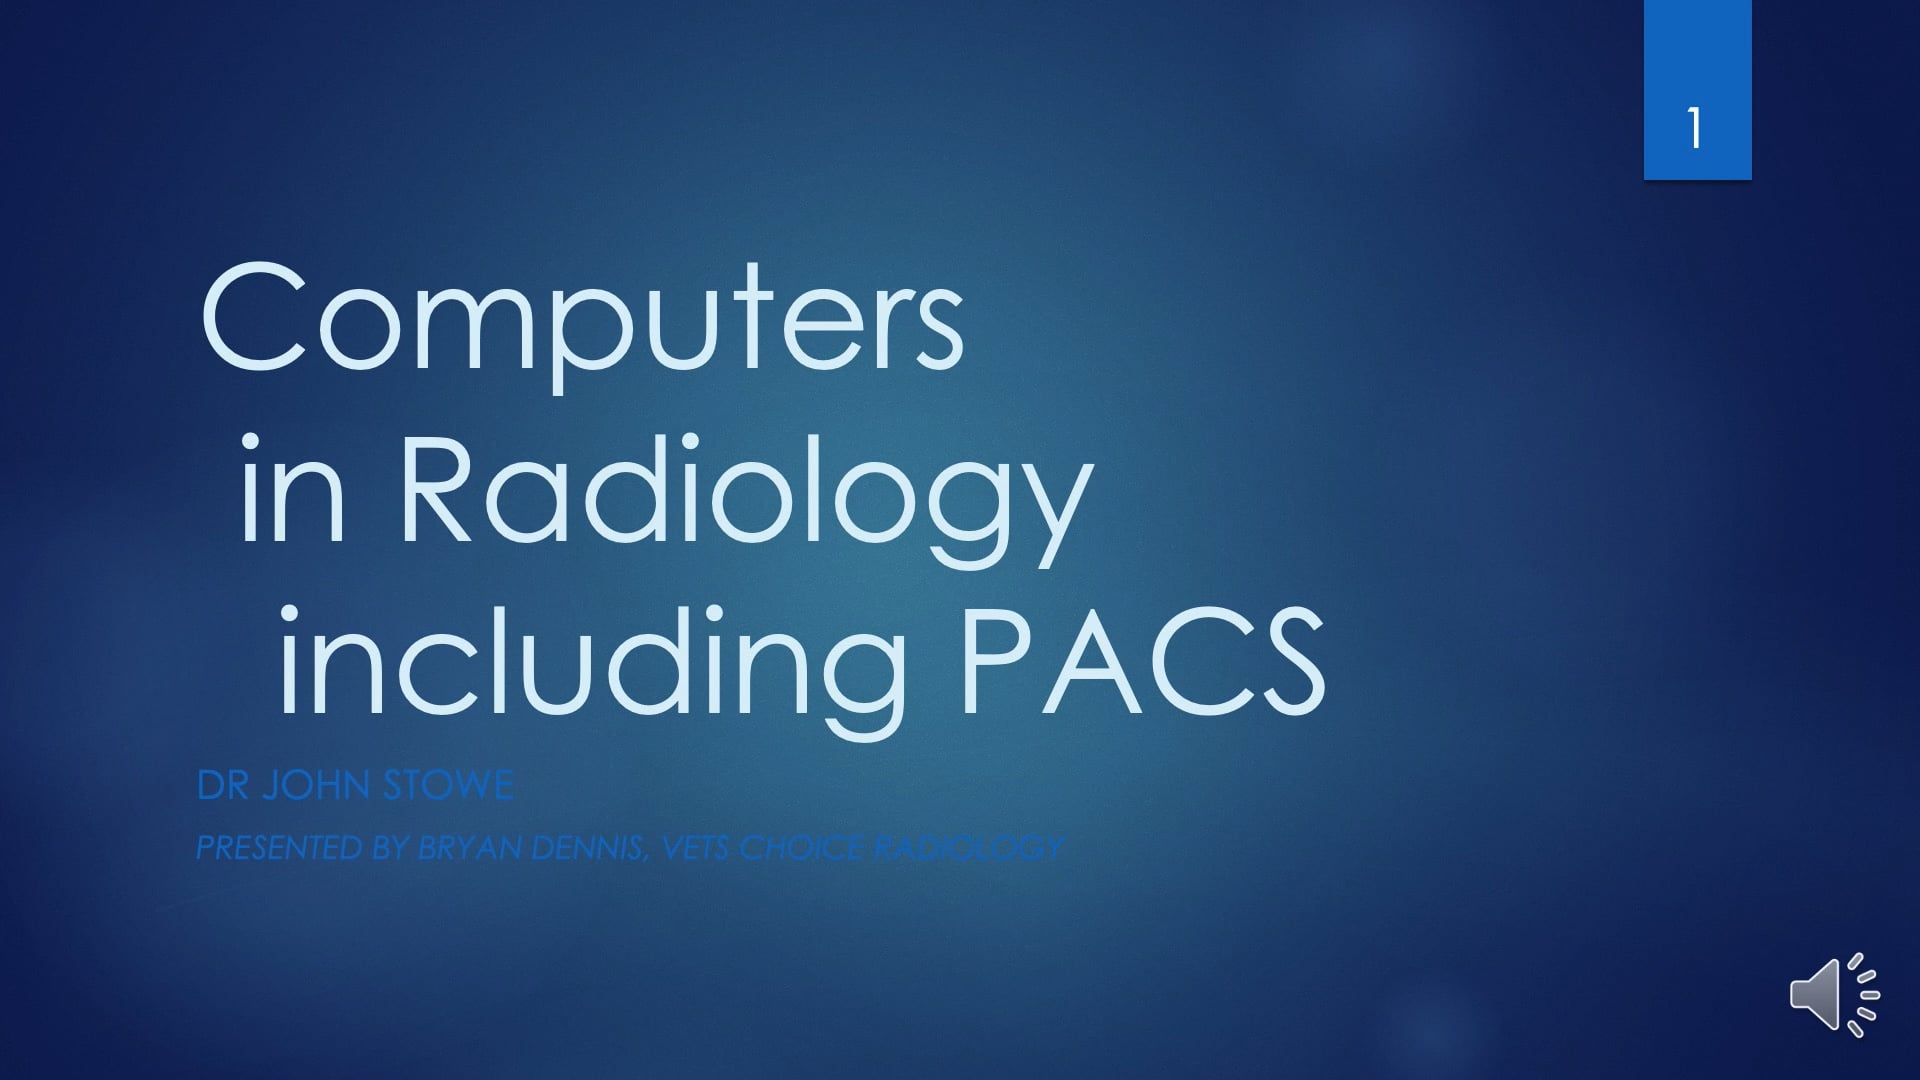 Computers in Radiology including PACS